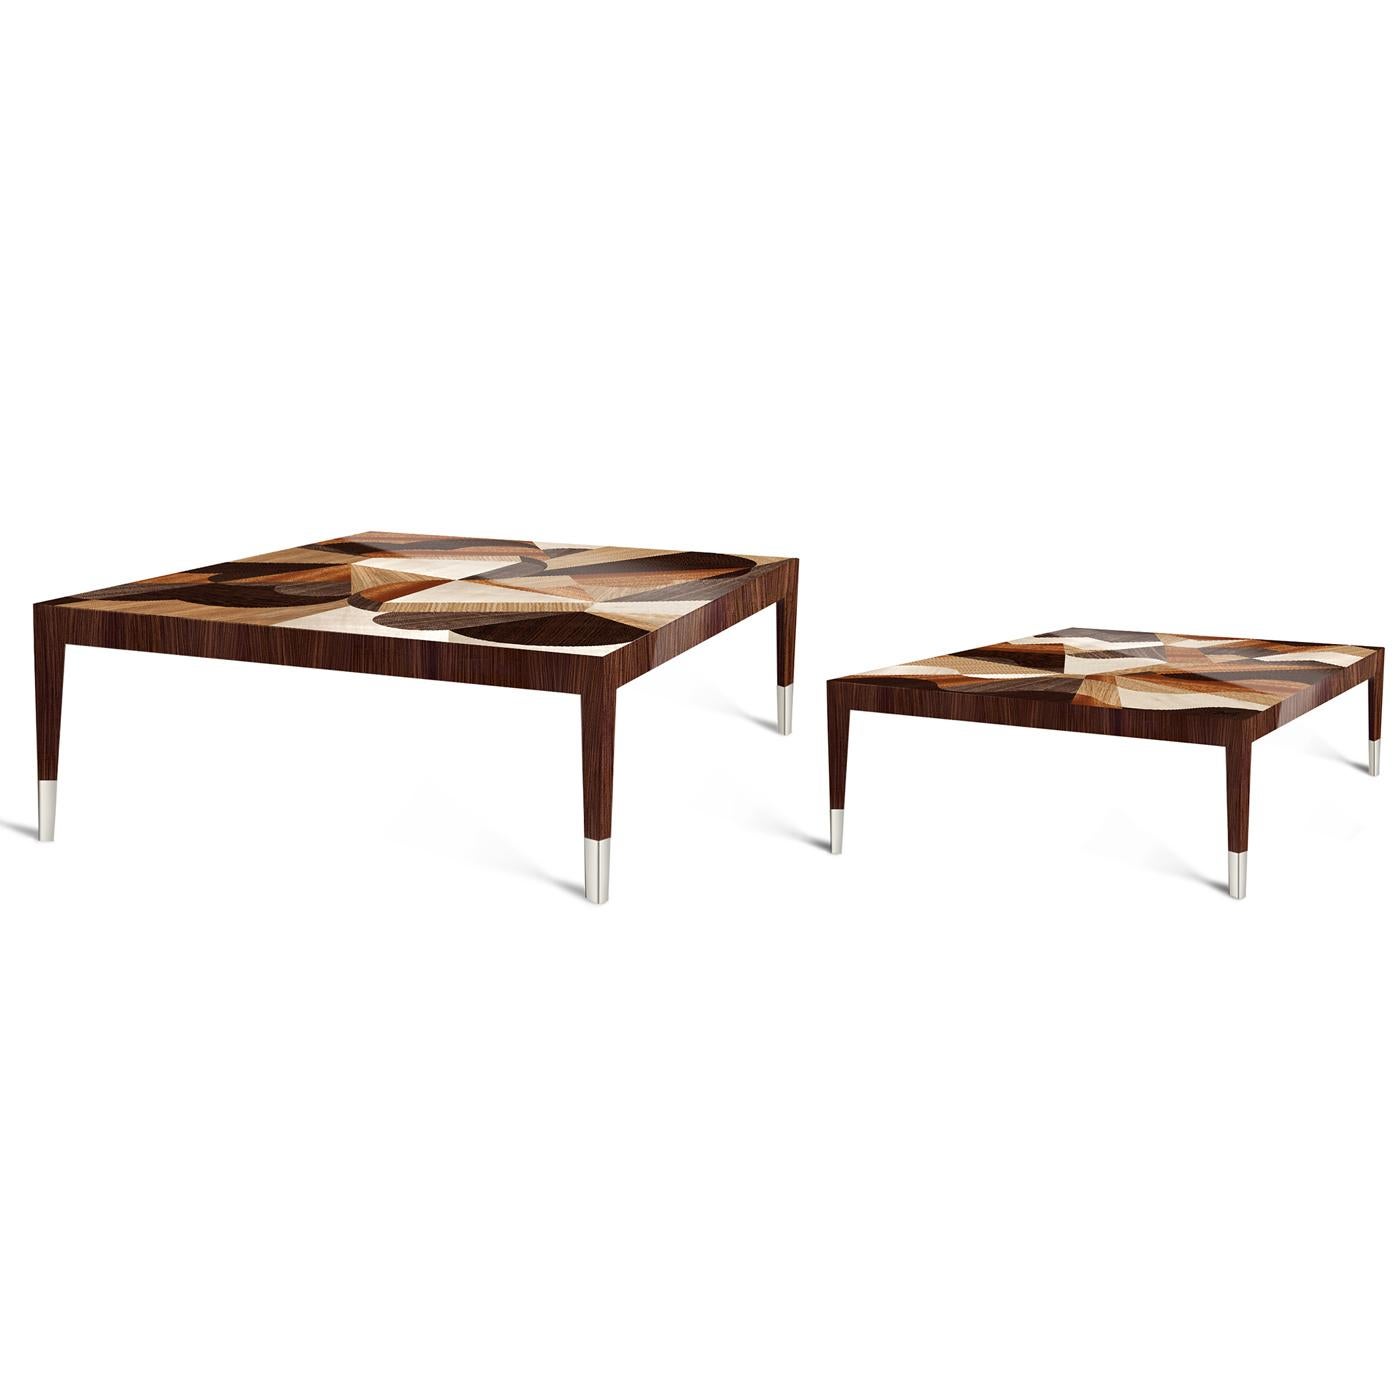 Balancing art and design, this exclusive coffee table transforms a simple rectangular shape into artwork with the top's mesmerizing inlays achieved by combining white maple, oak, mahogany, walnut, and wenge woods. The wood frame, supported by